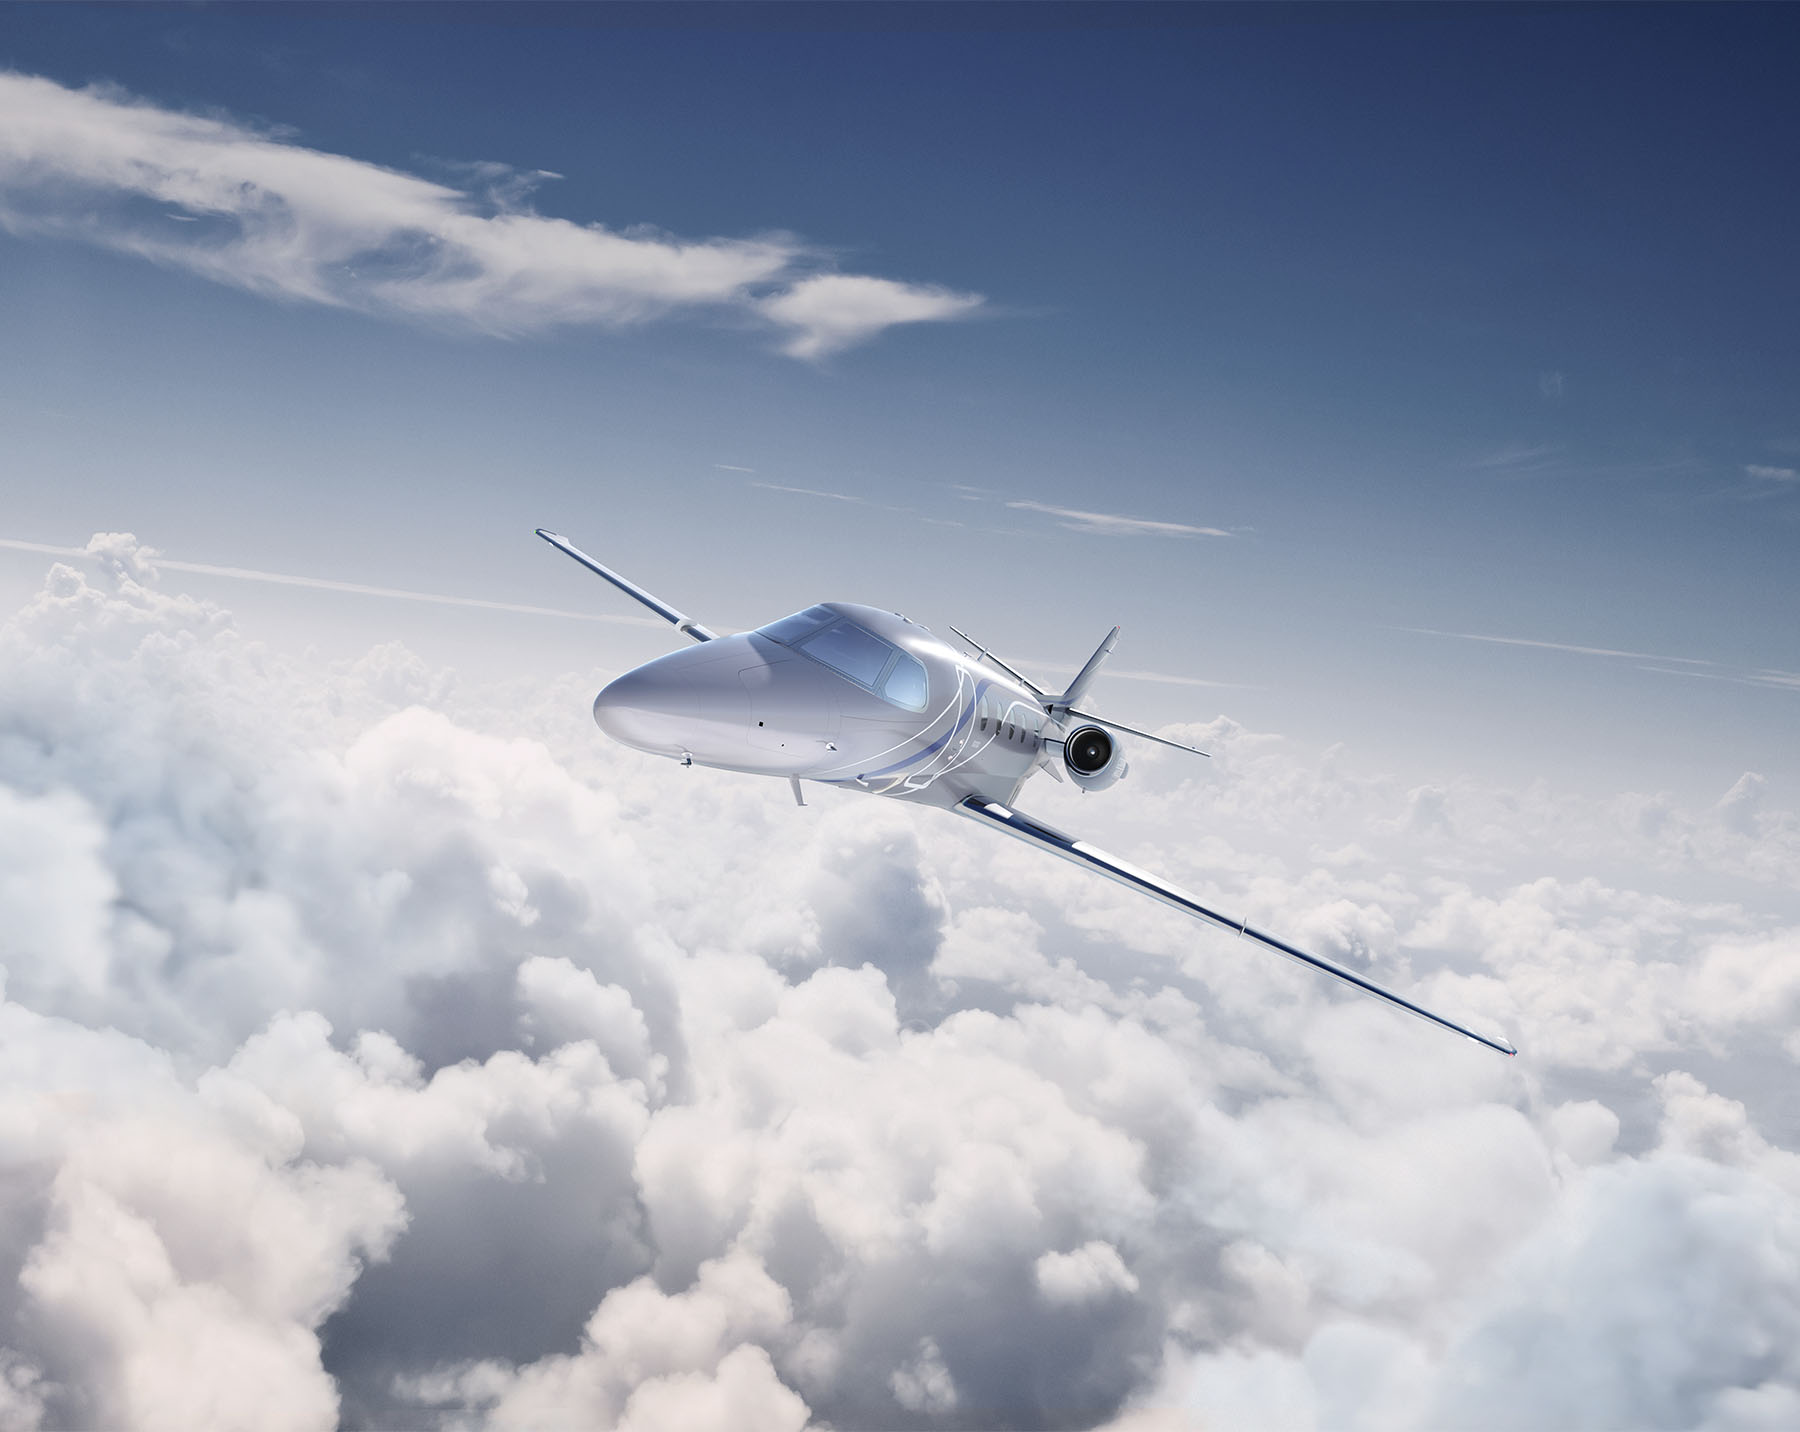 Citation Ascend flying above the clouds.